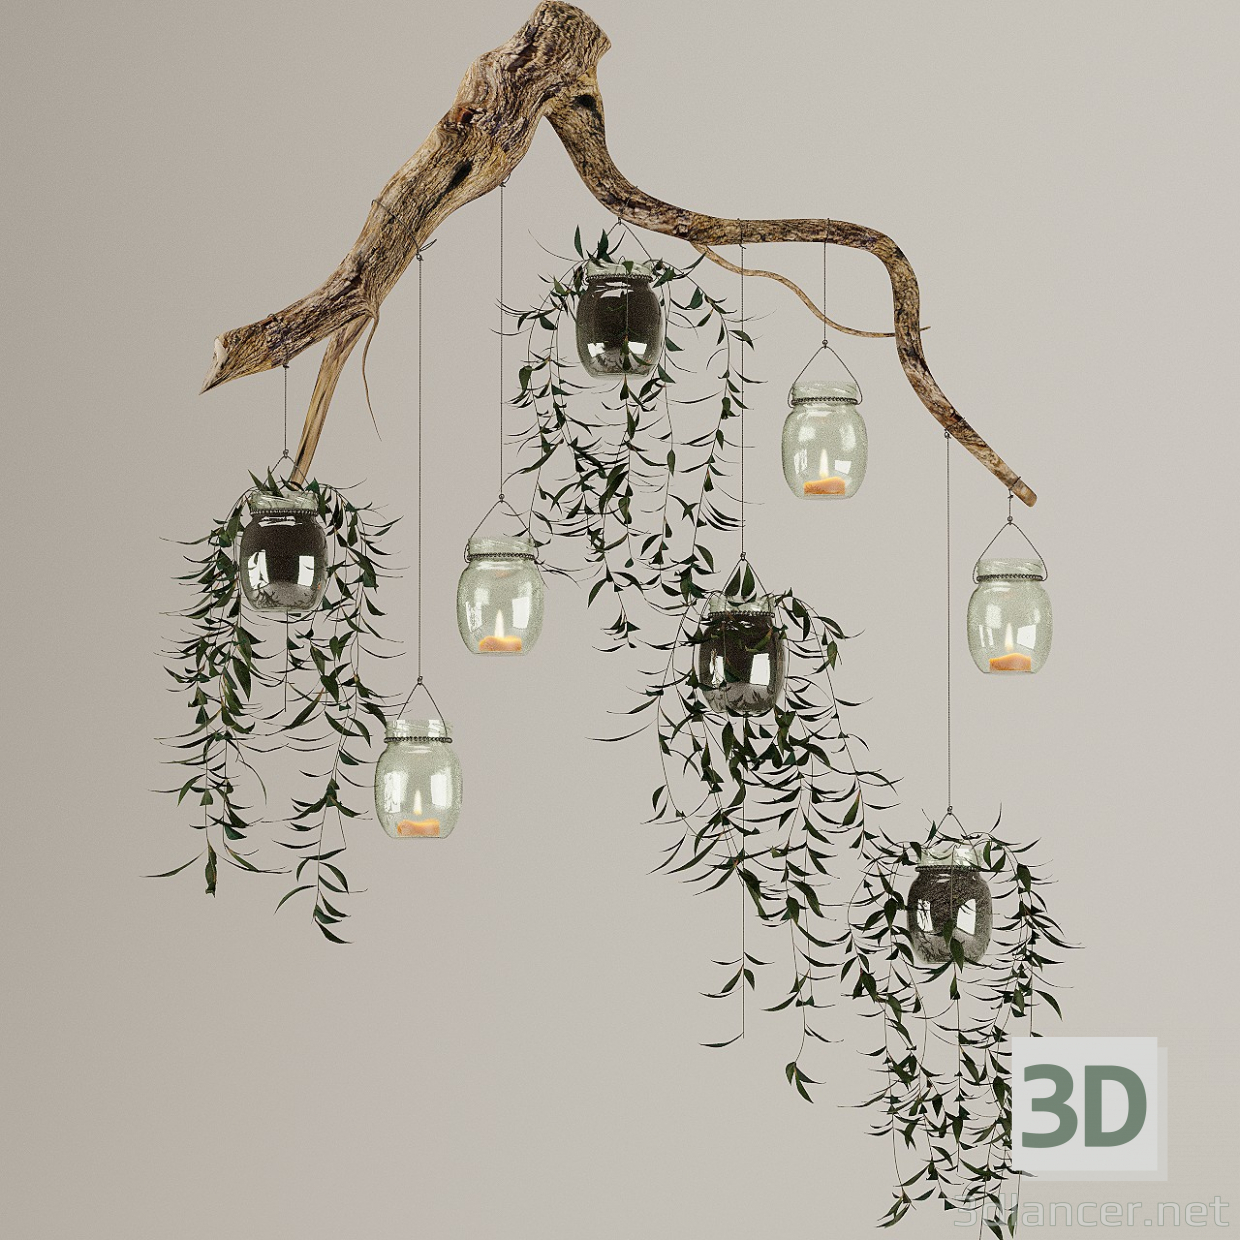 3d Wooden Branch with Plants in Pots and Candles model buy - render